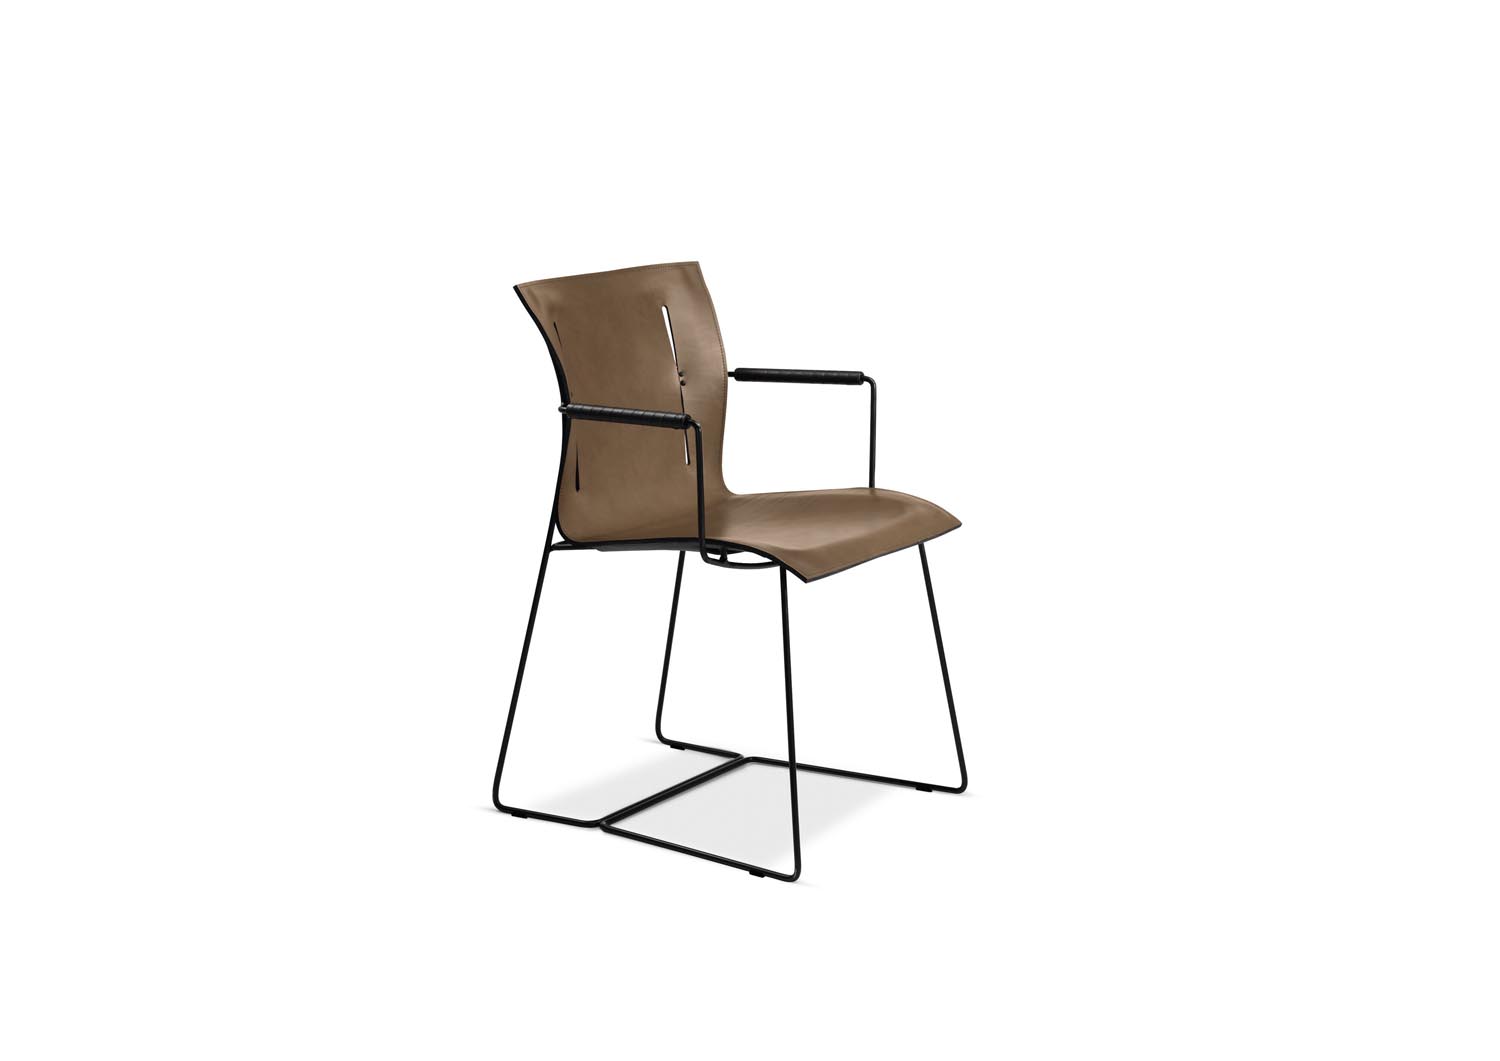 Walter Knoll Cuoio ChAIR